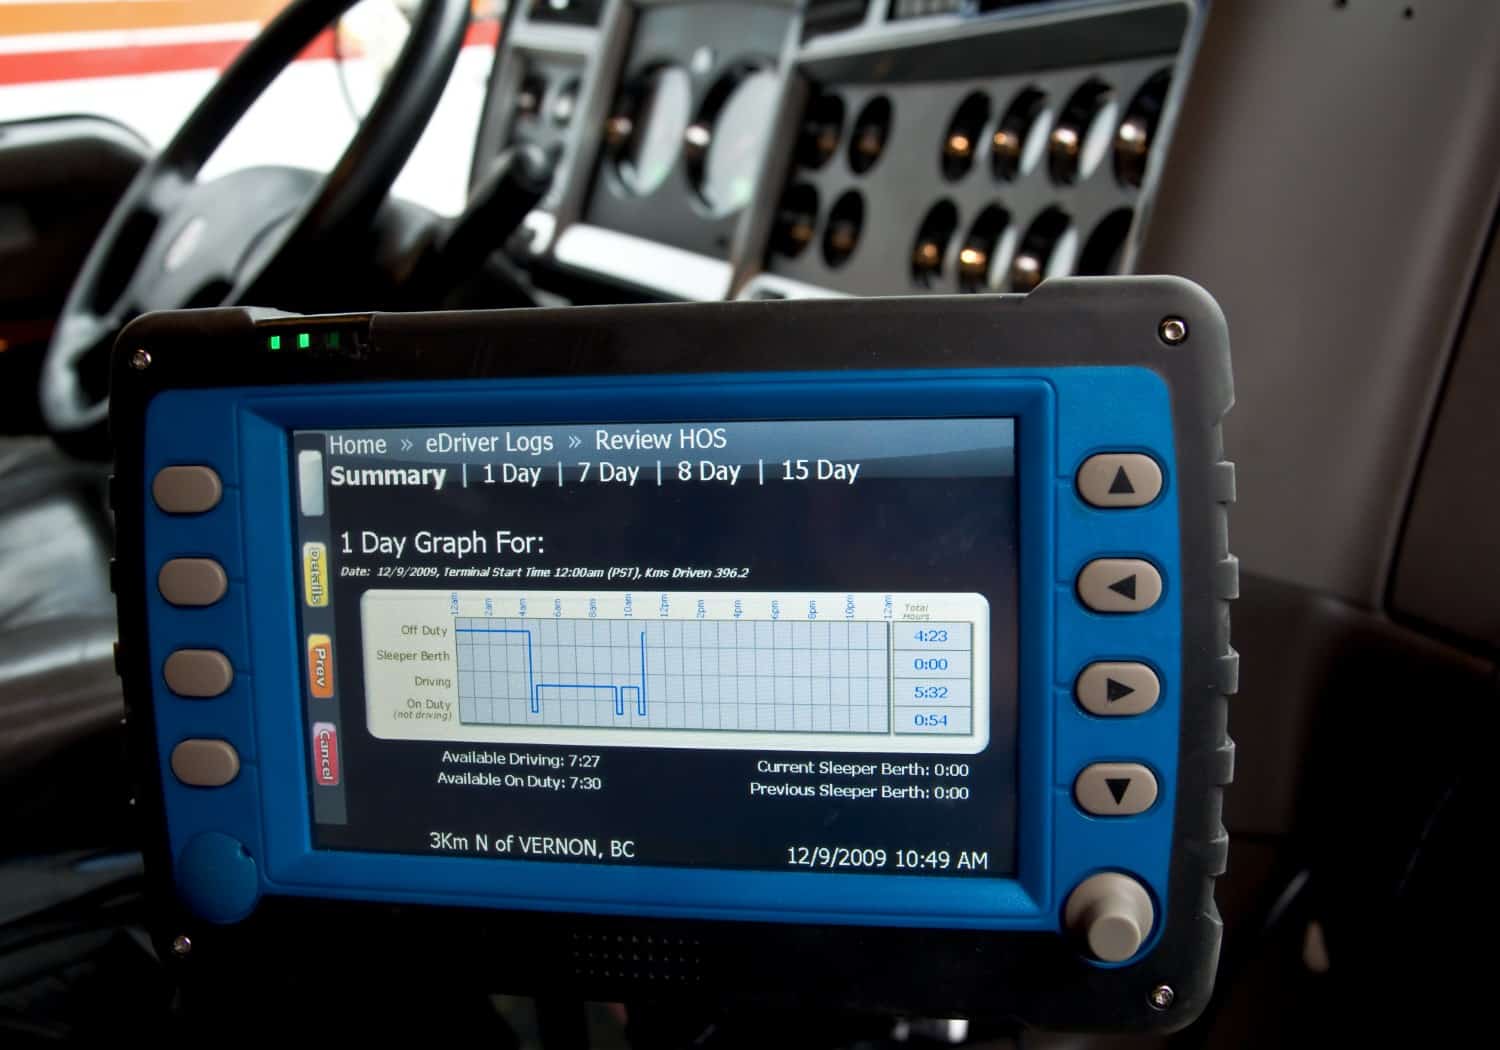 stock-photo-an-electronic-logbook-for-truck-drivers-keeps-track-of-the-hours-of-service-42770536